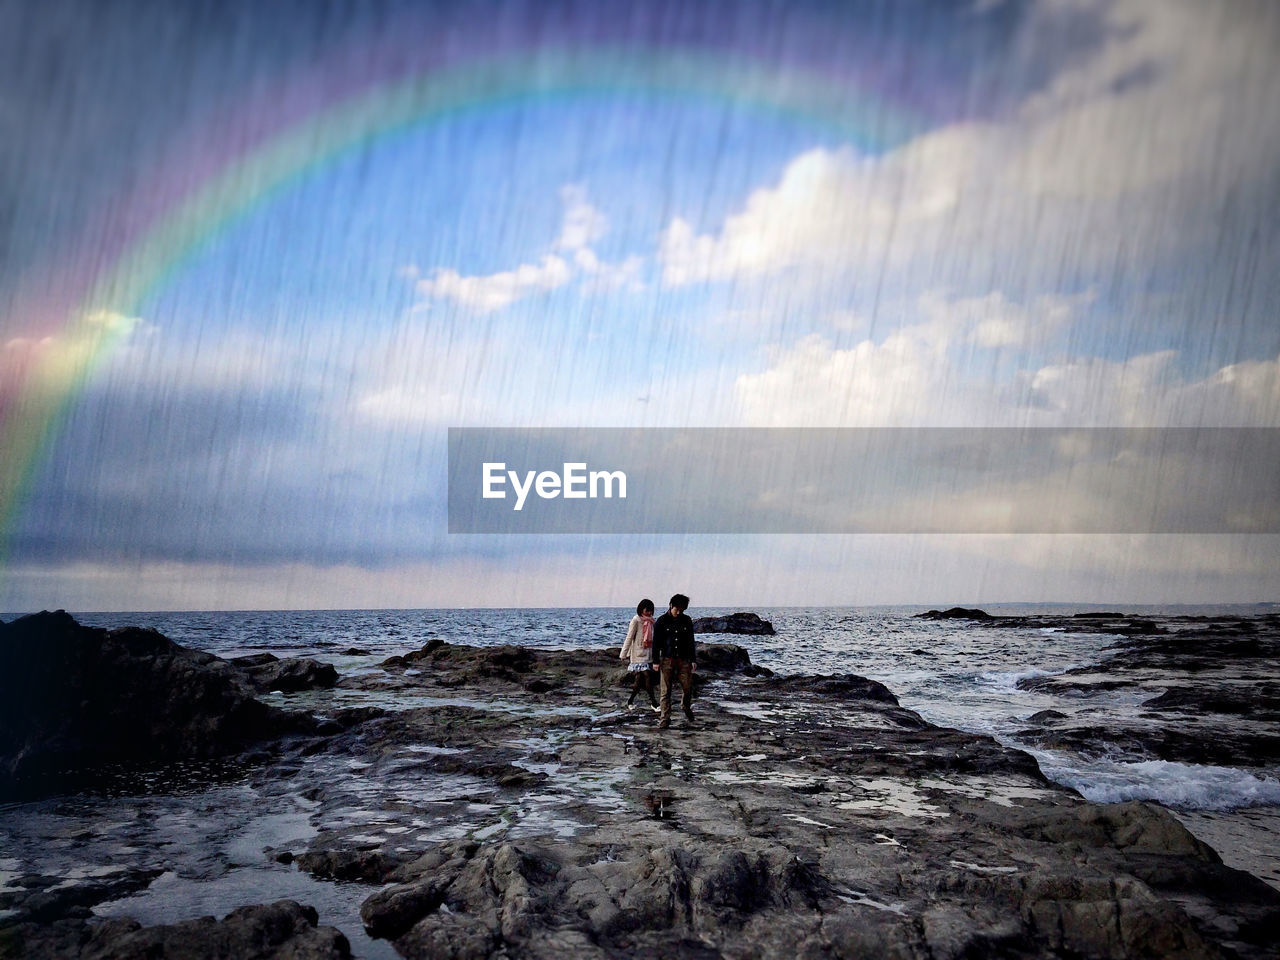 People on rocky shore against rainbow in sky during monsoon